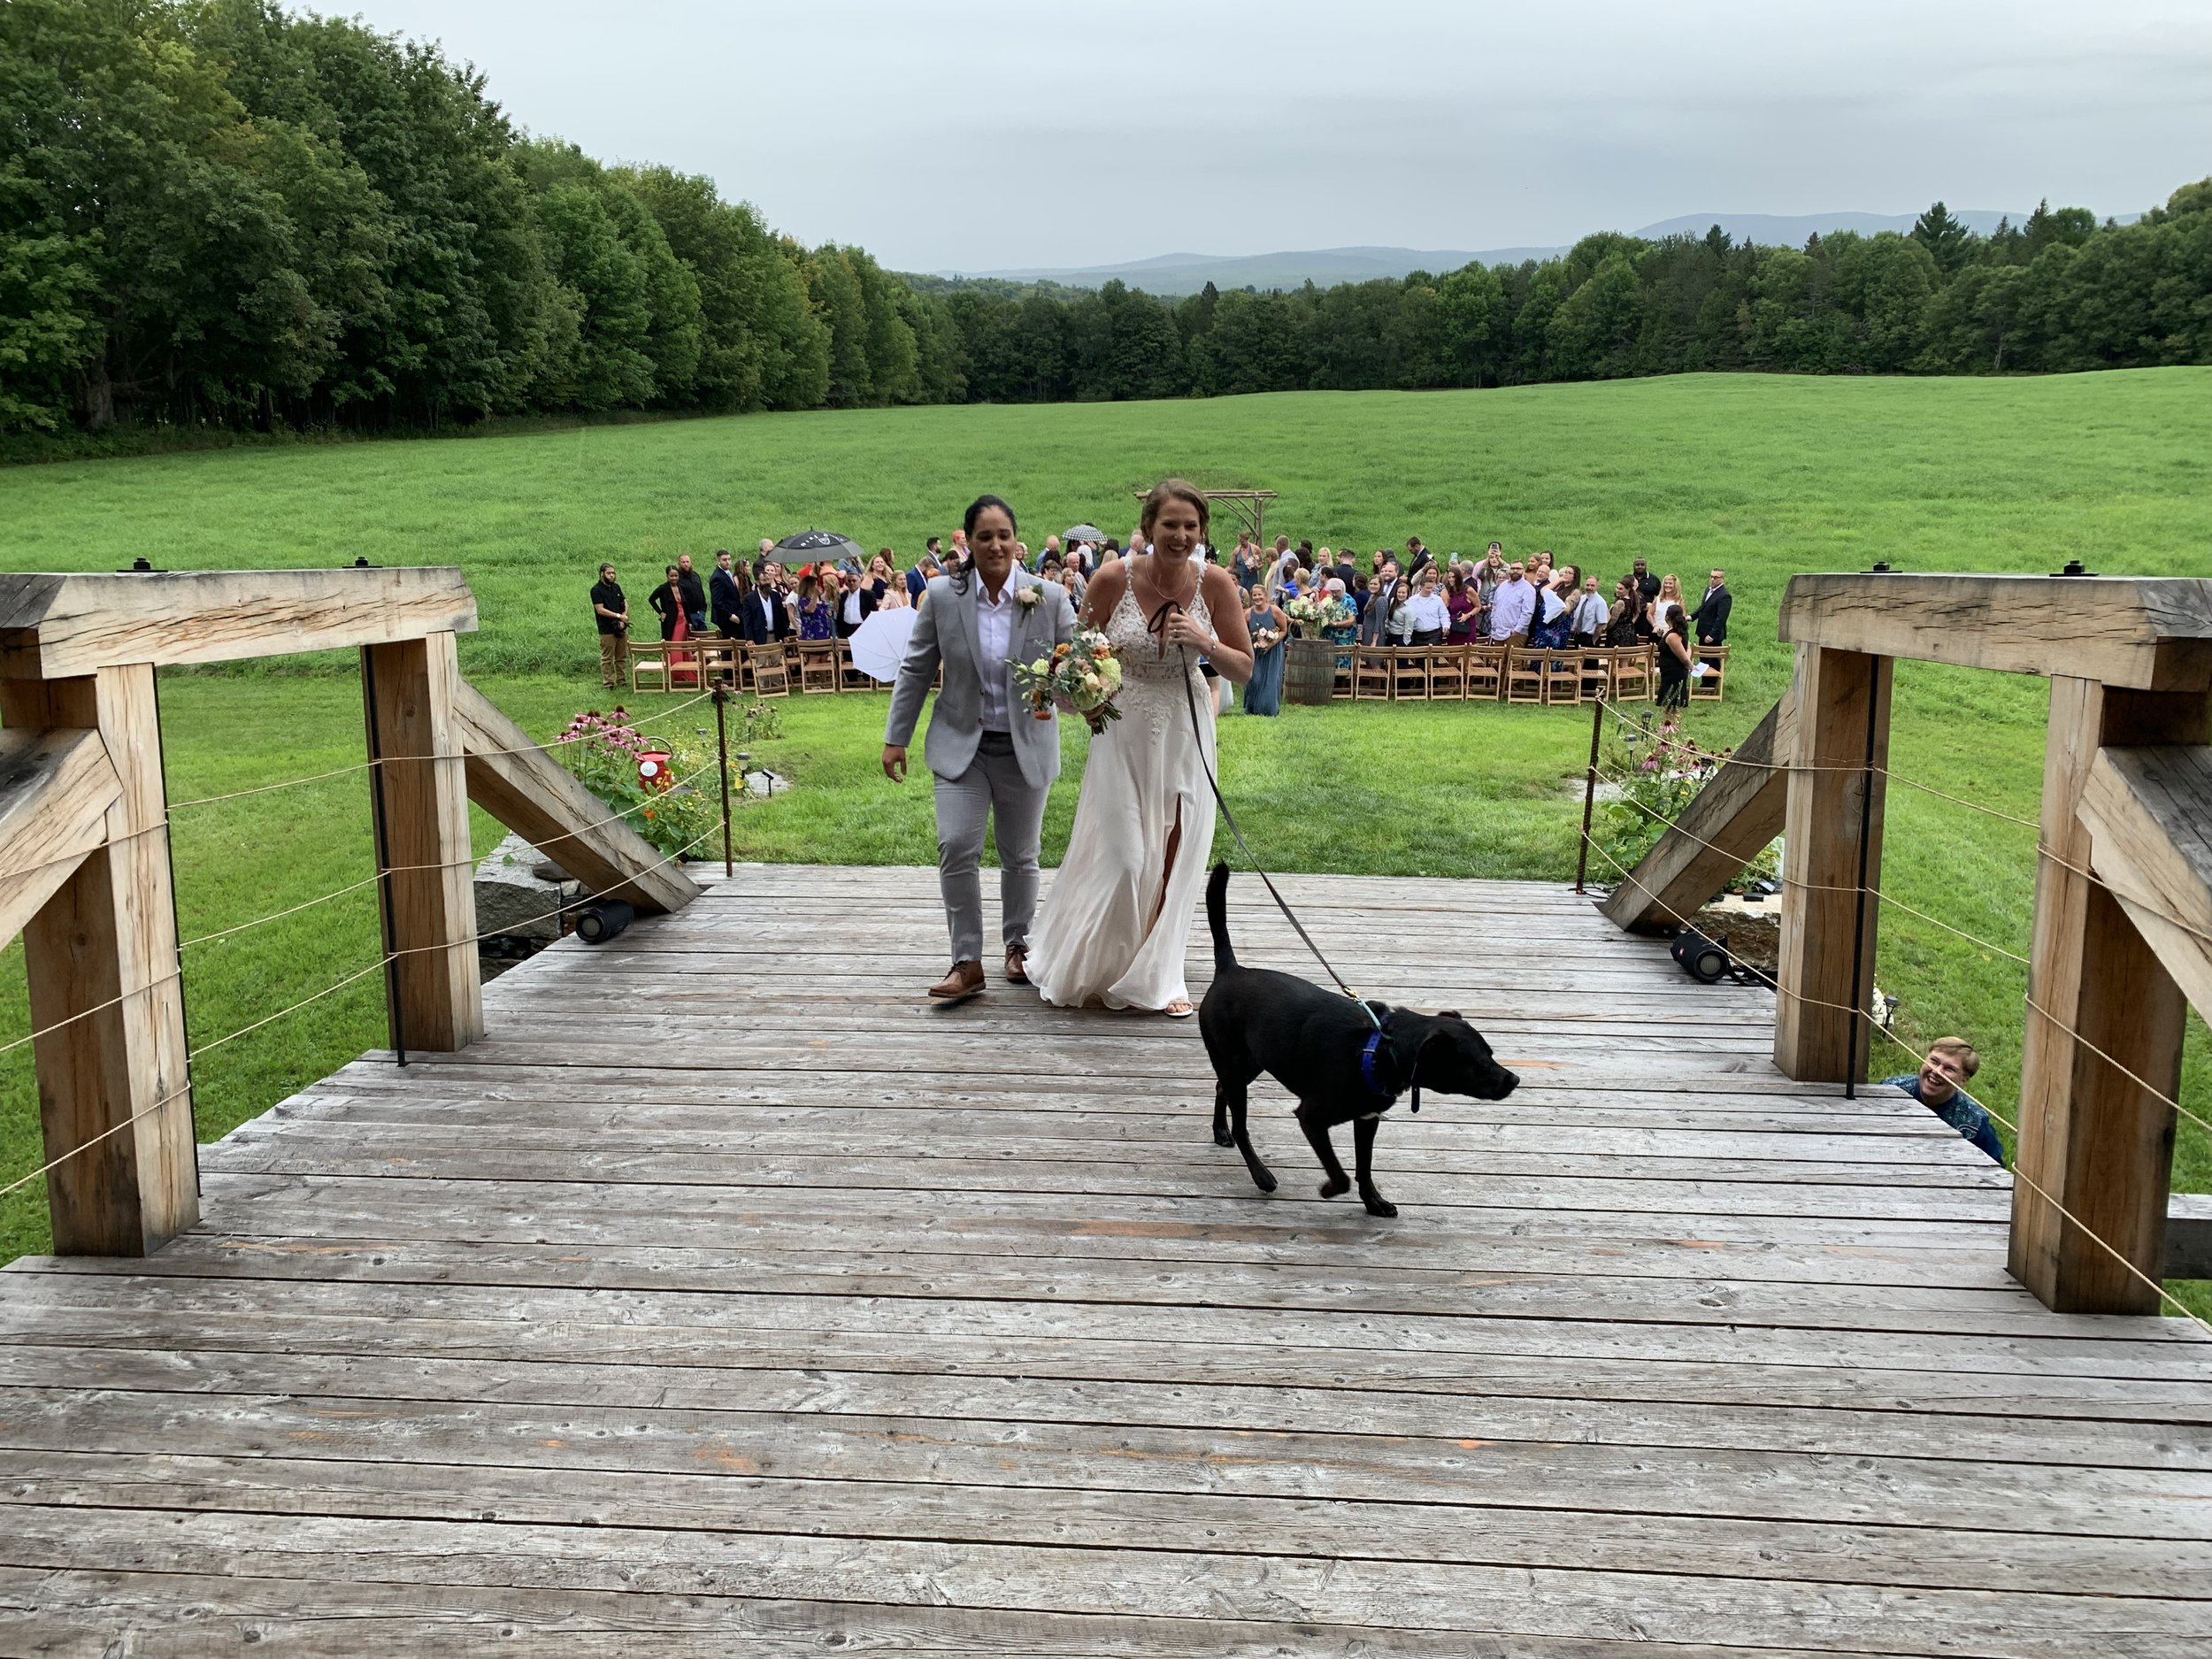 A dog leads the bride and groom into the barn after the wedding ceremony 